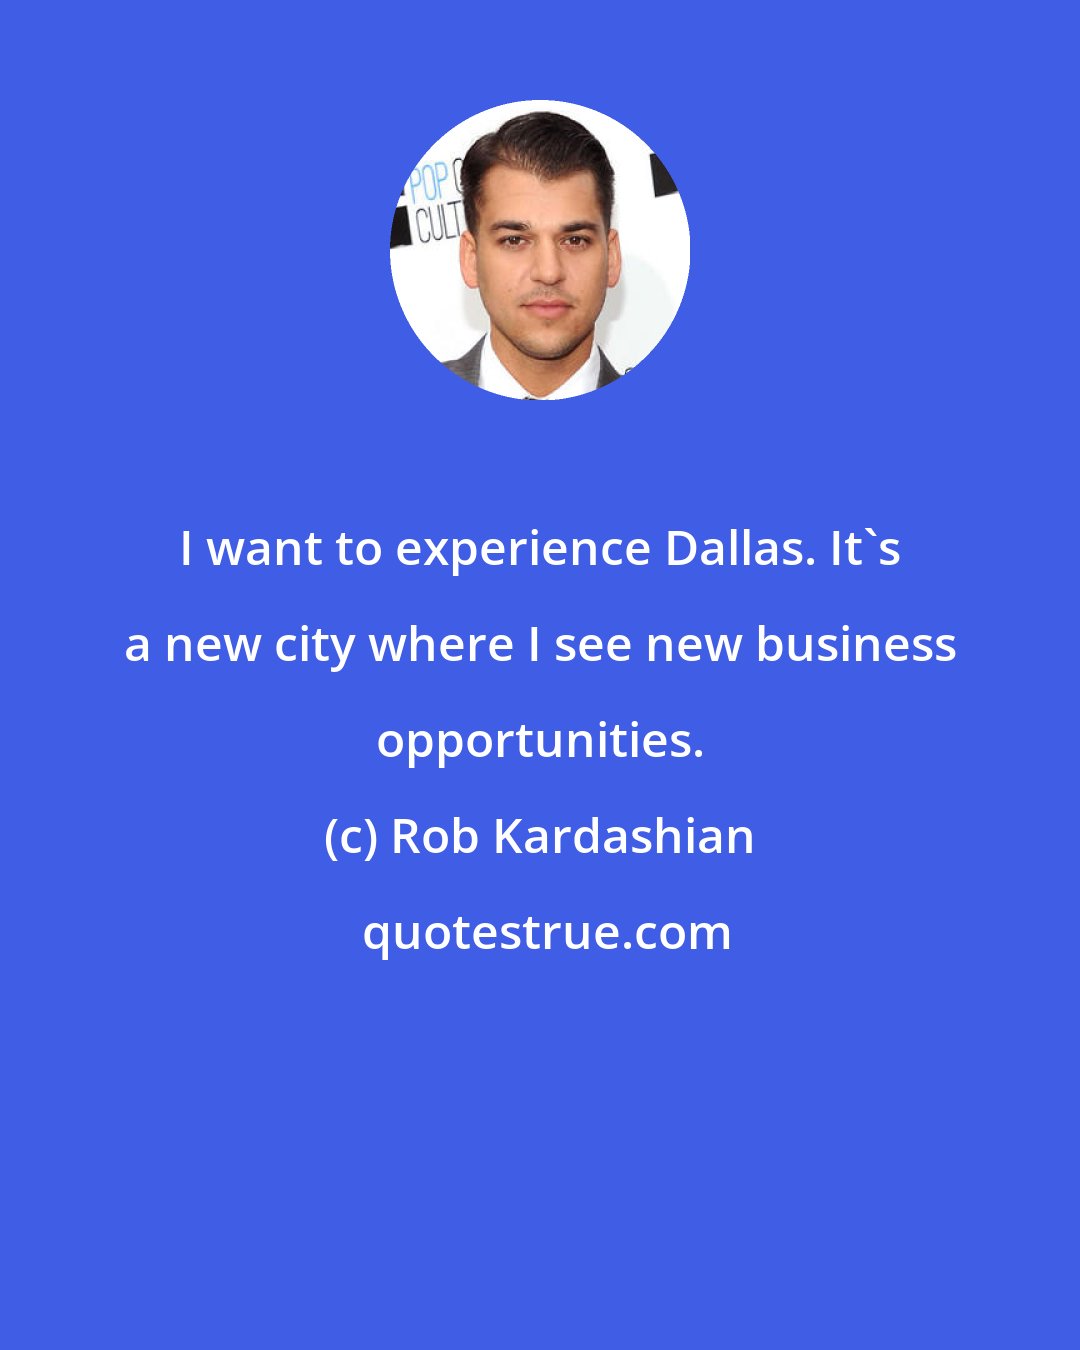 Rob Kardashian: I want to experience Dallas. It's a new city where I see new business opportunities.